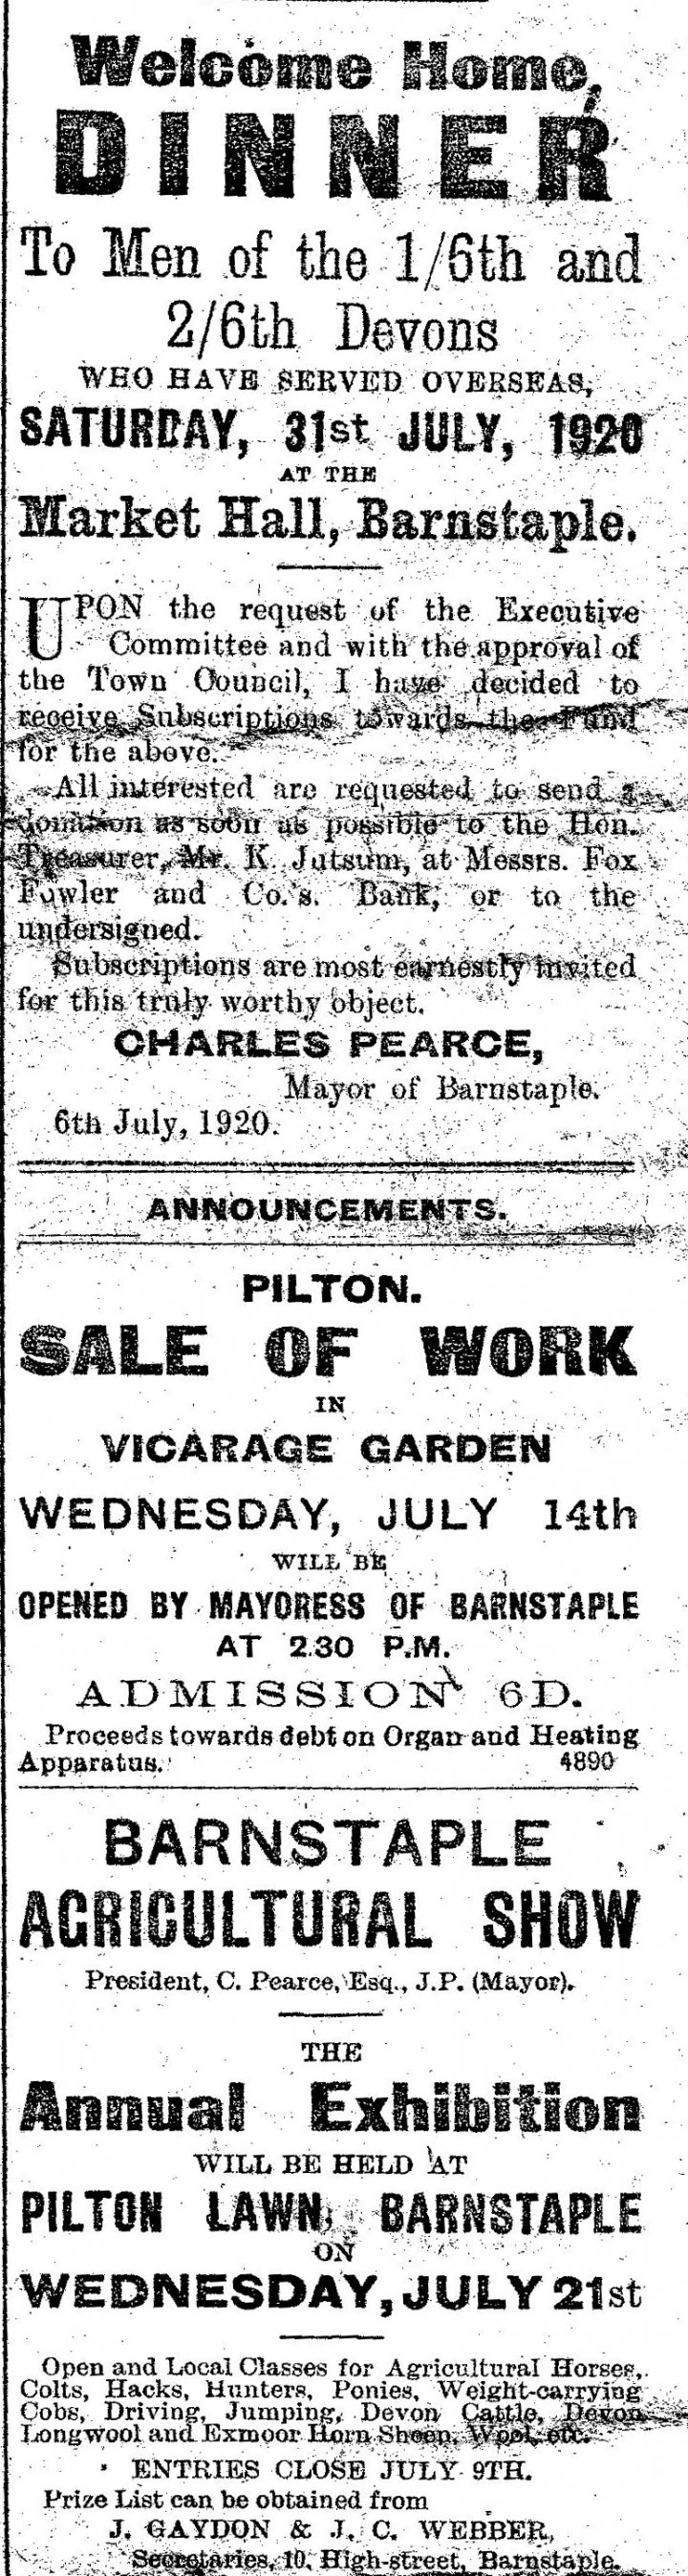 Pilton in the North Devon Herald, July 8, 1920 – Welcome Home for the Devons, Sale of Work and Barnstaple Agricultural Show